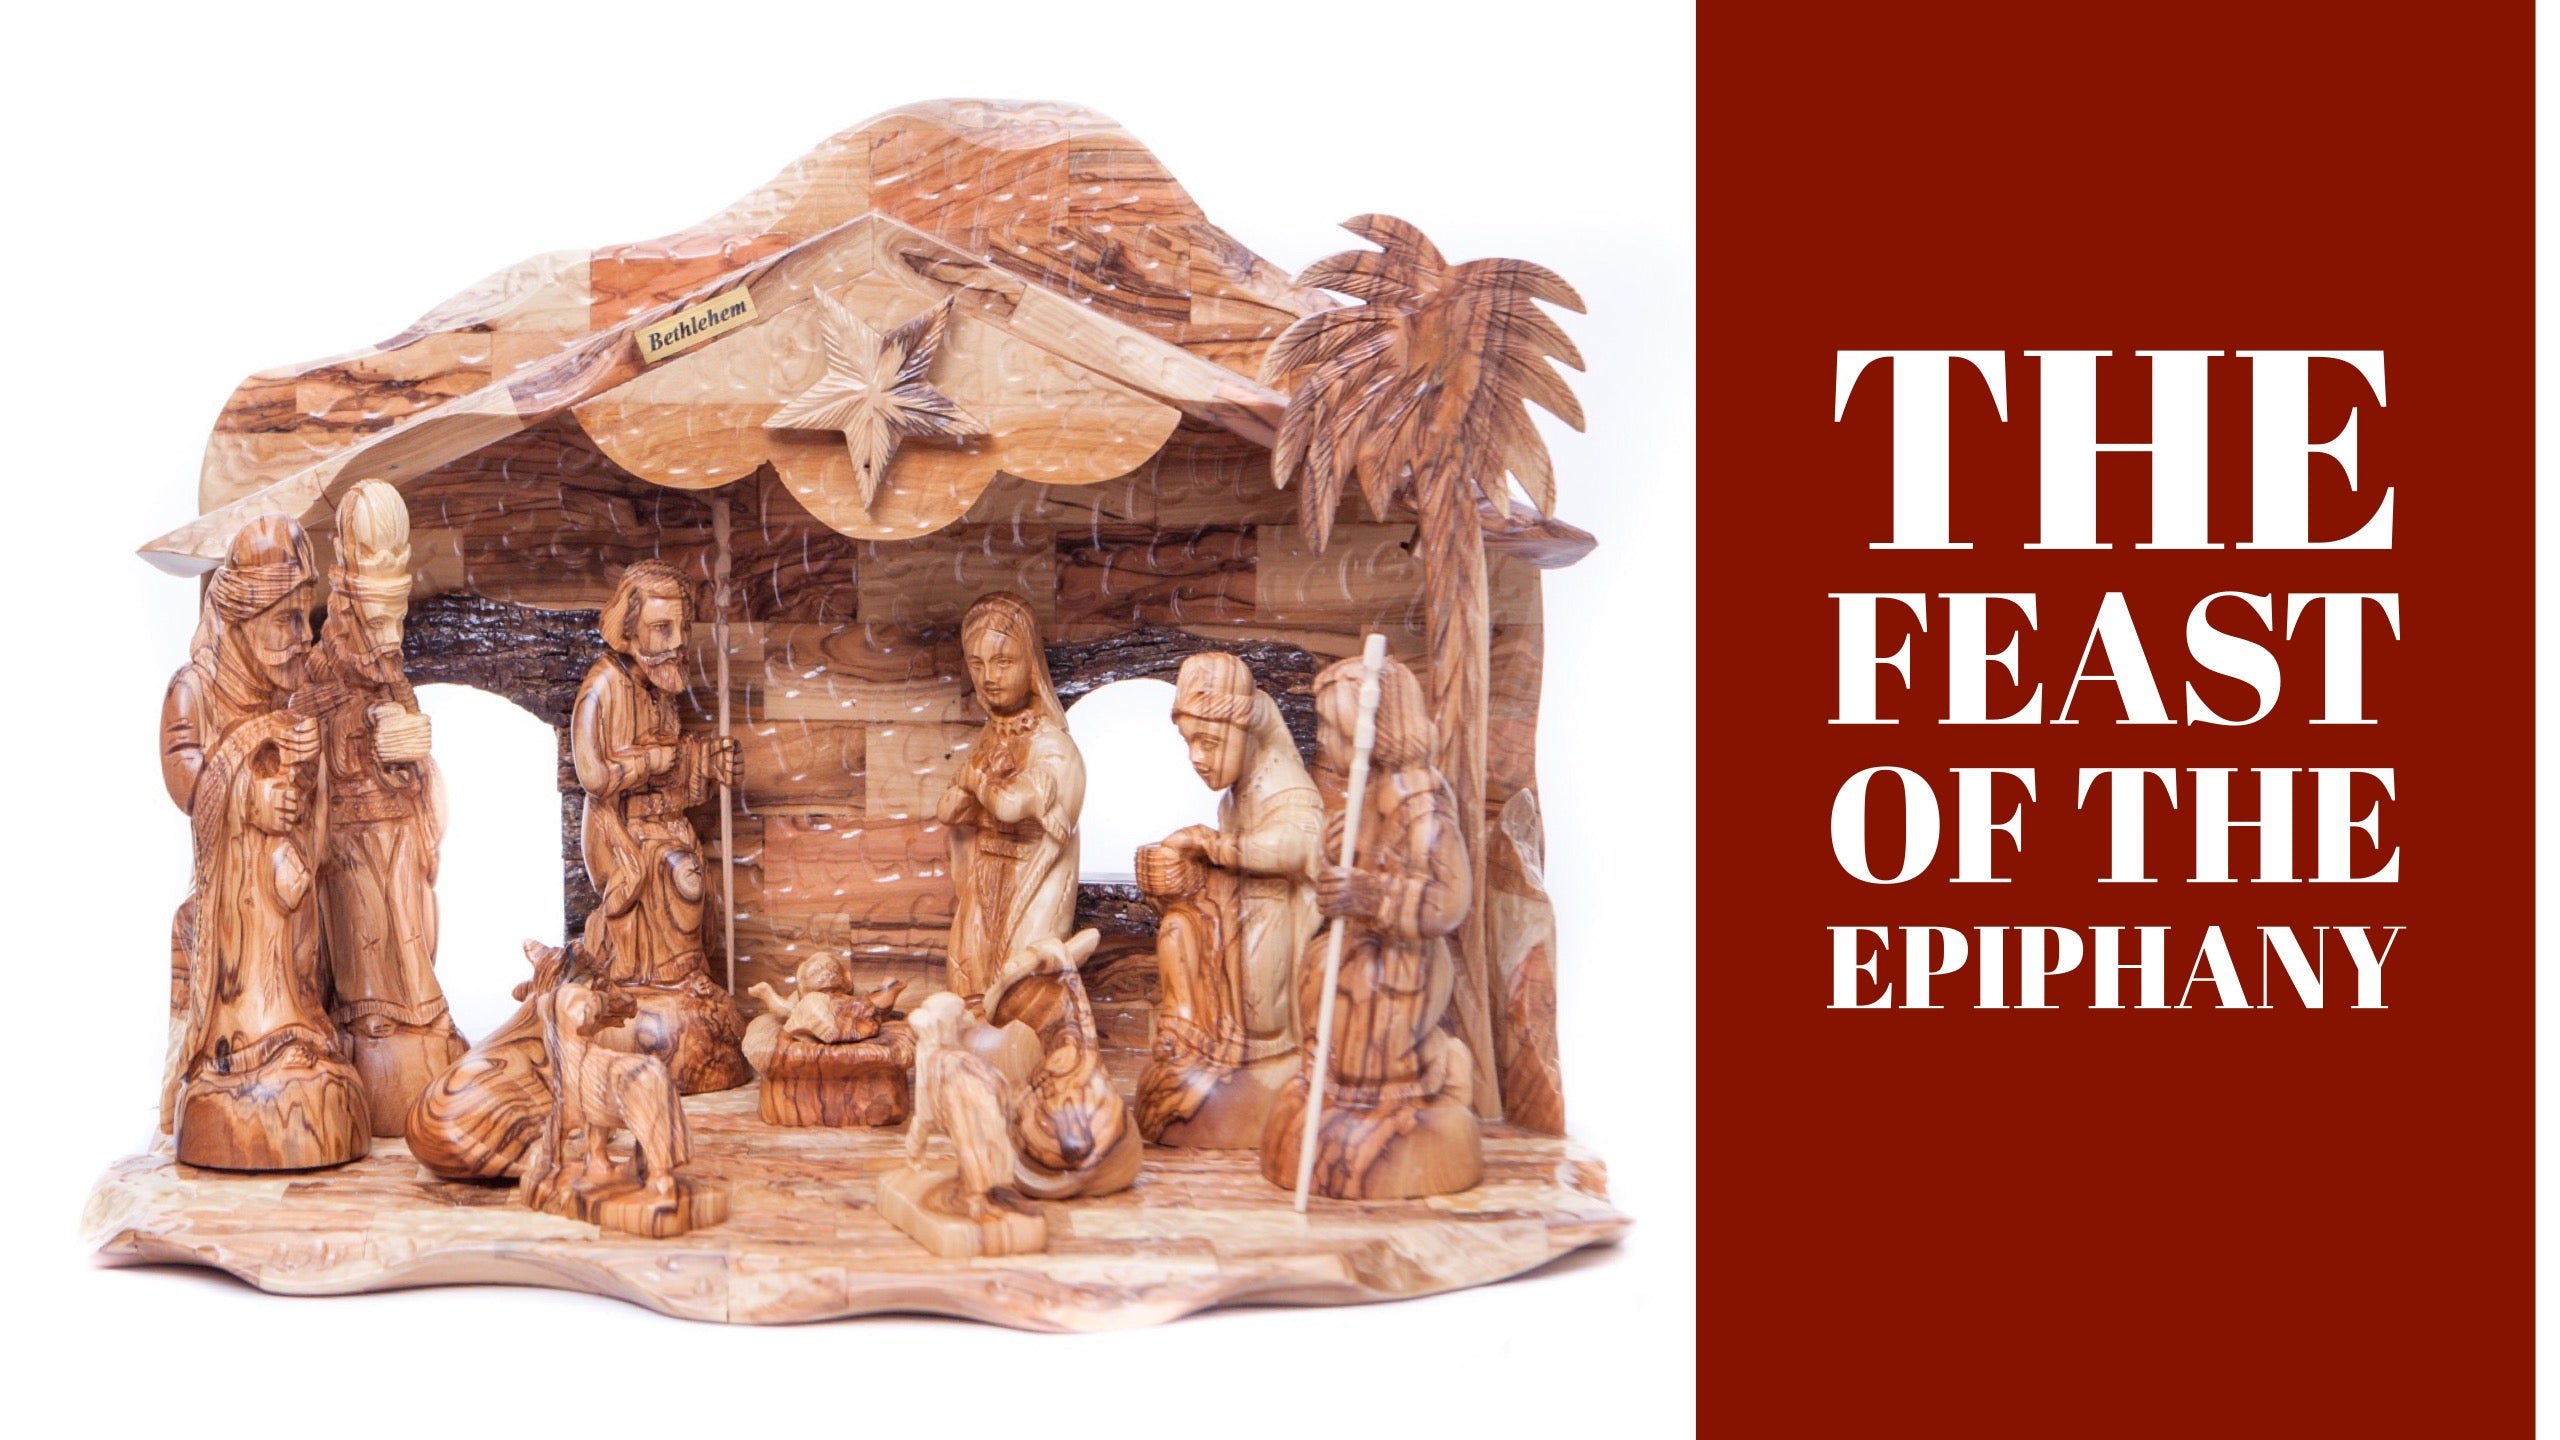 The Feast of the Epiphany